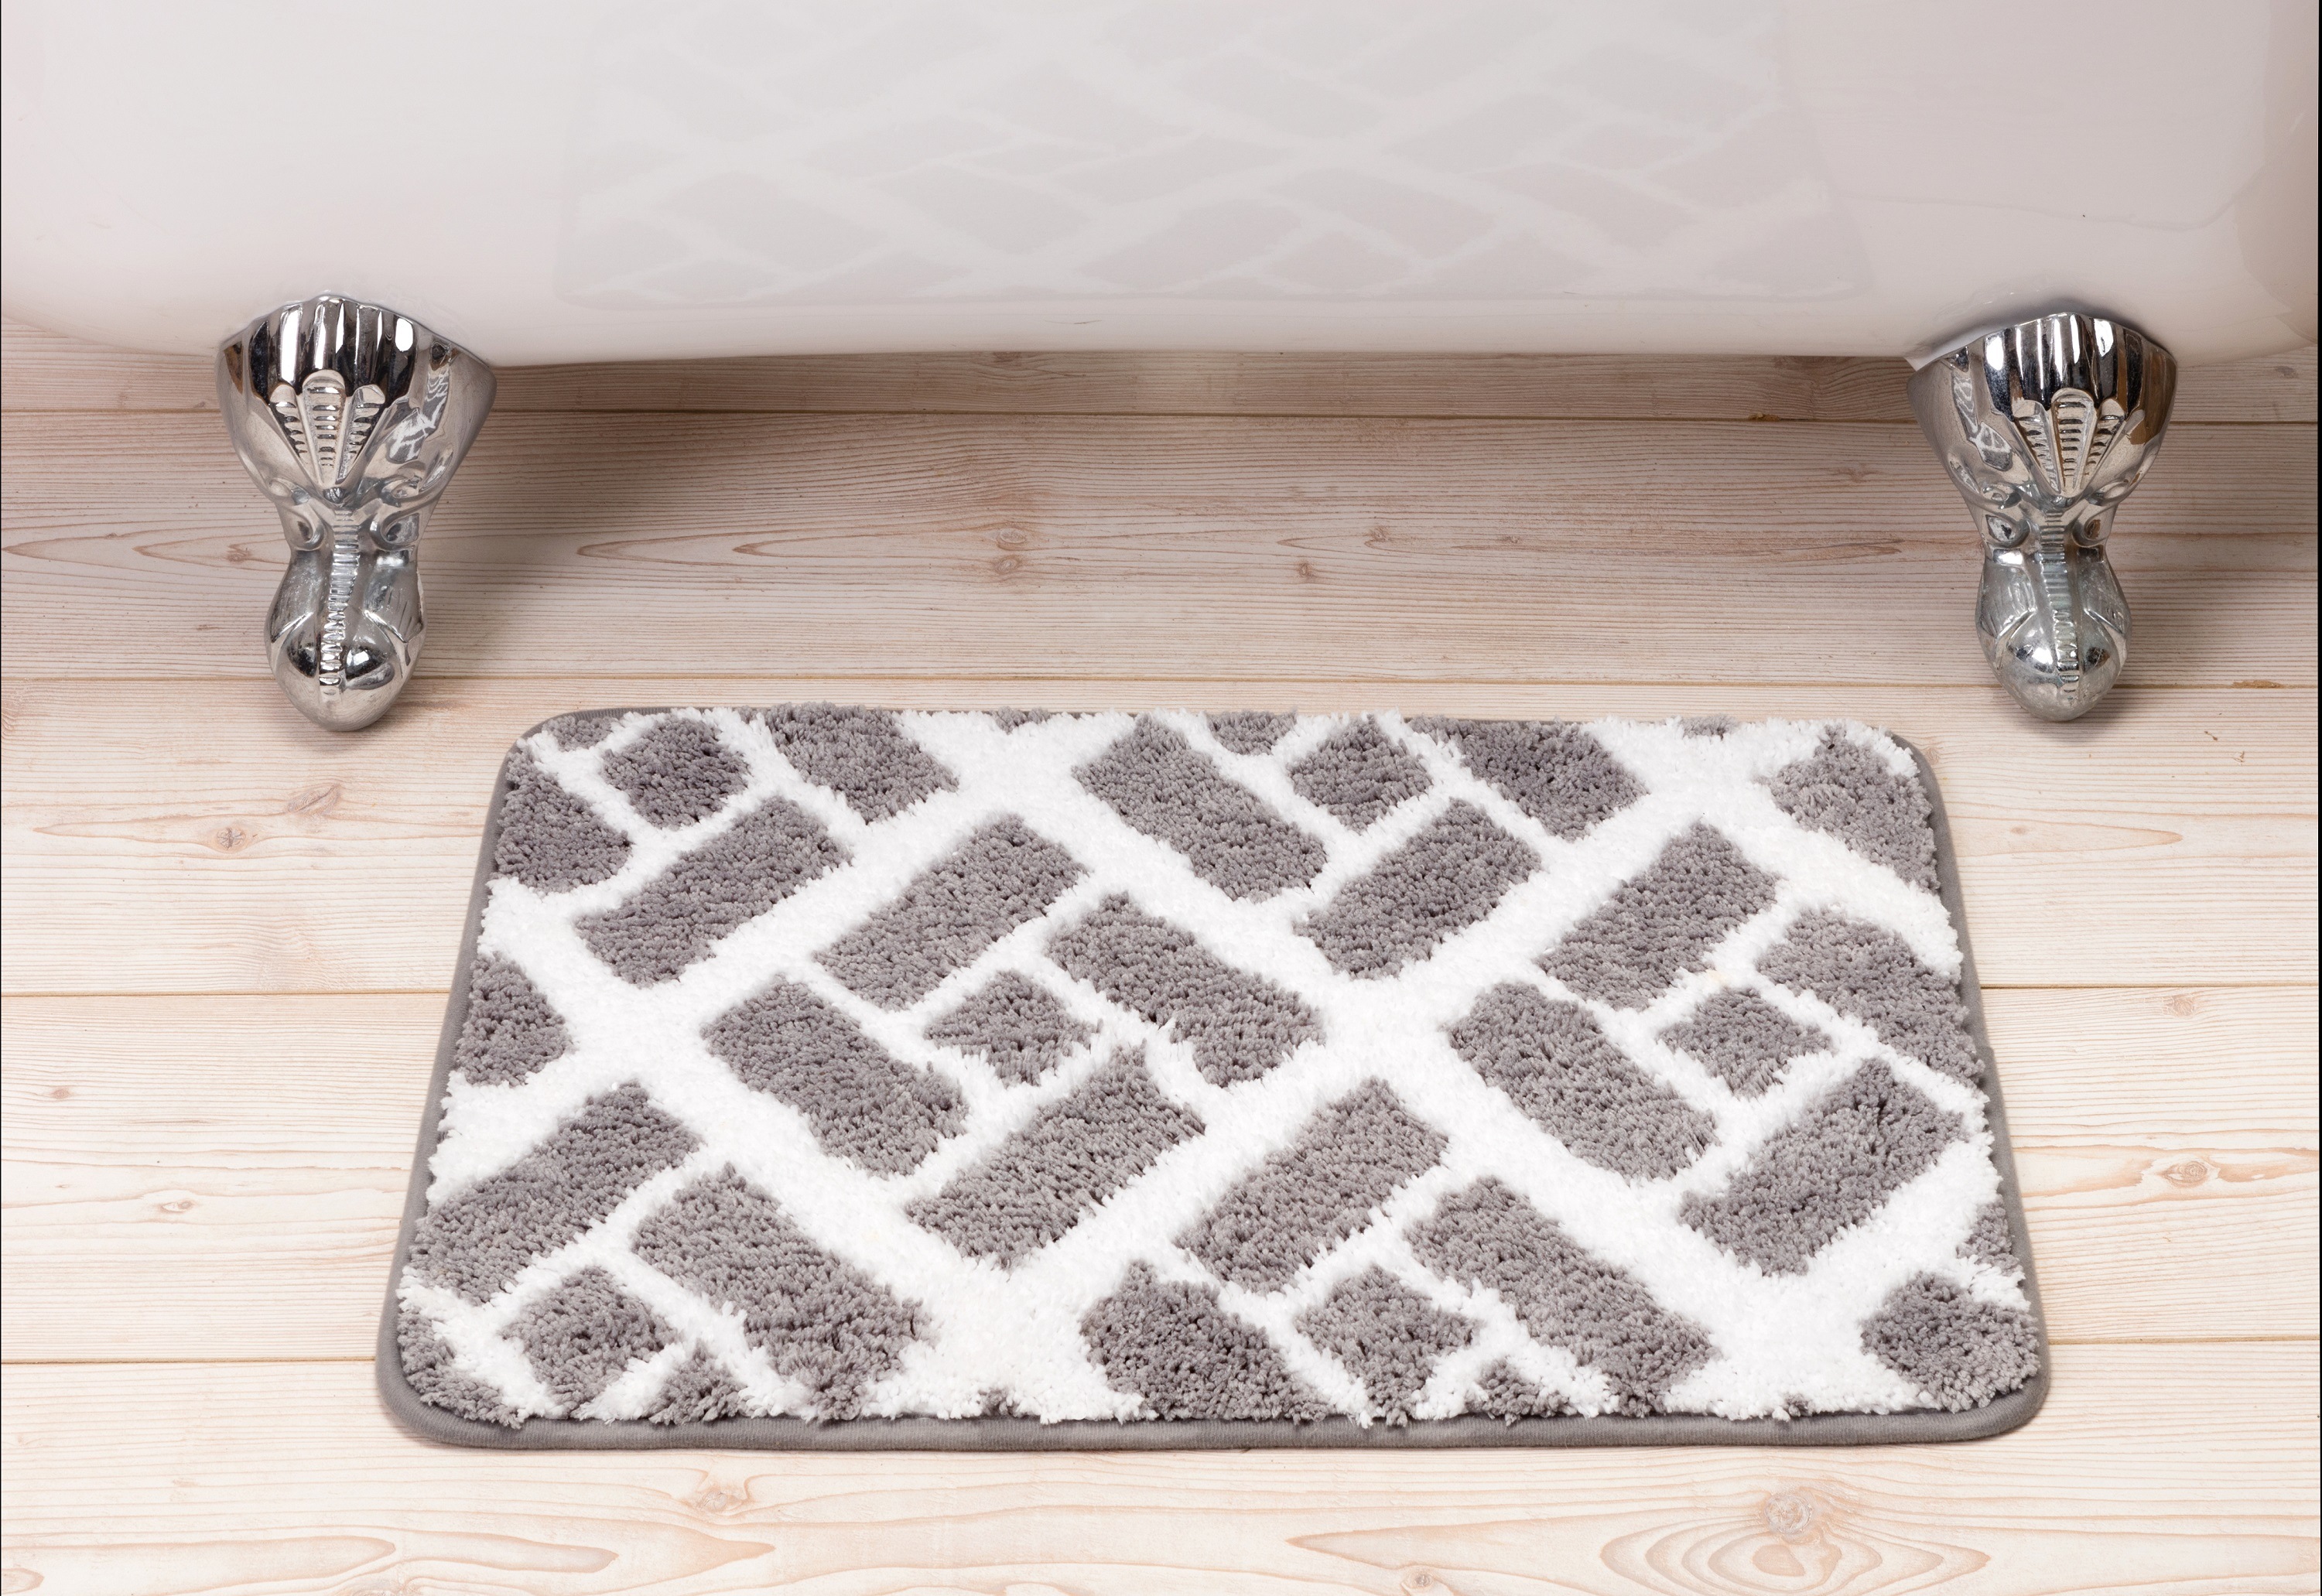 Gray and white patterned bathmat